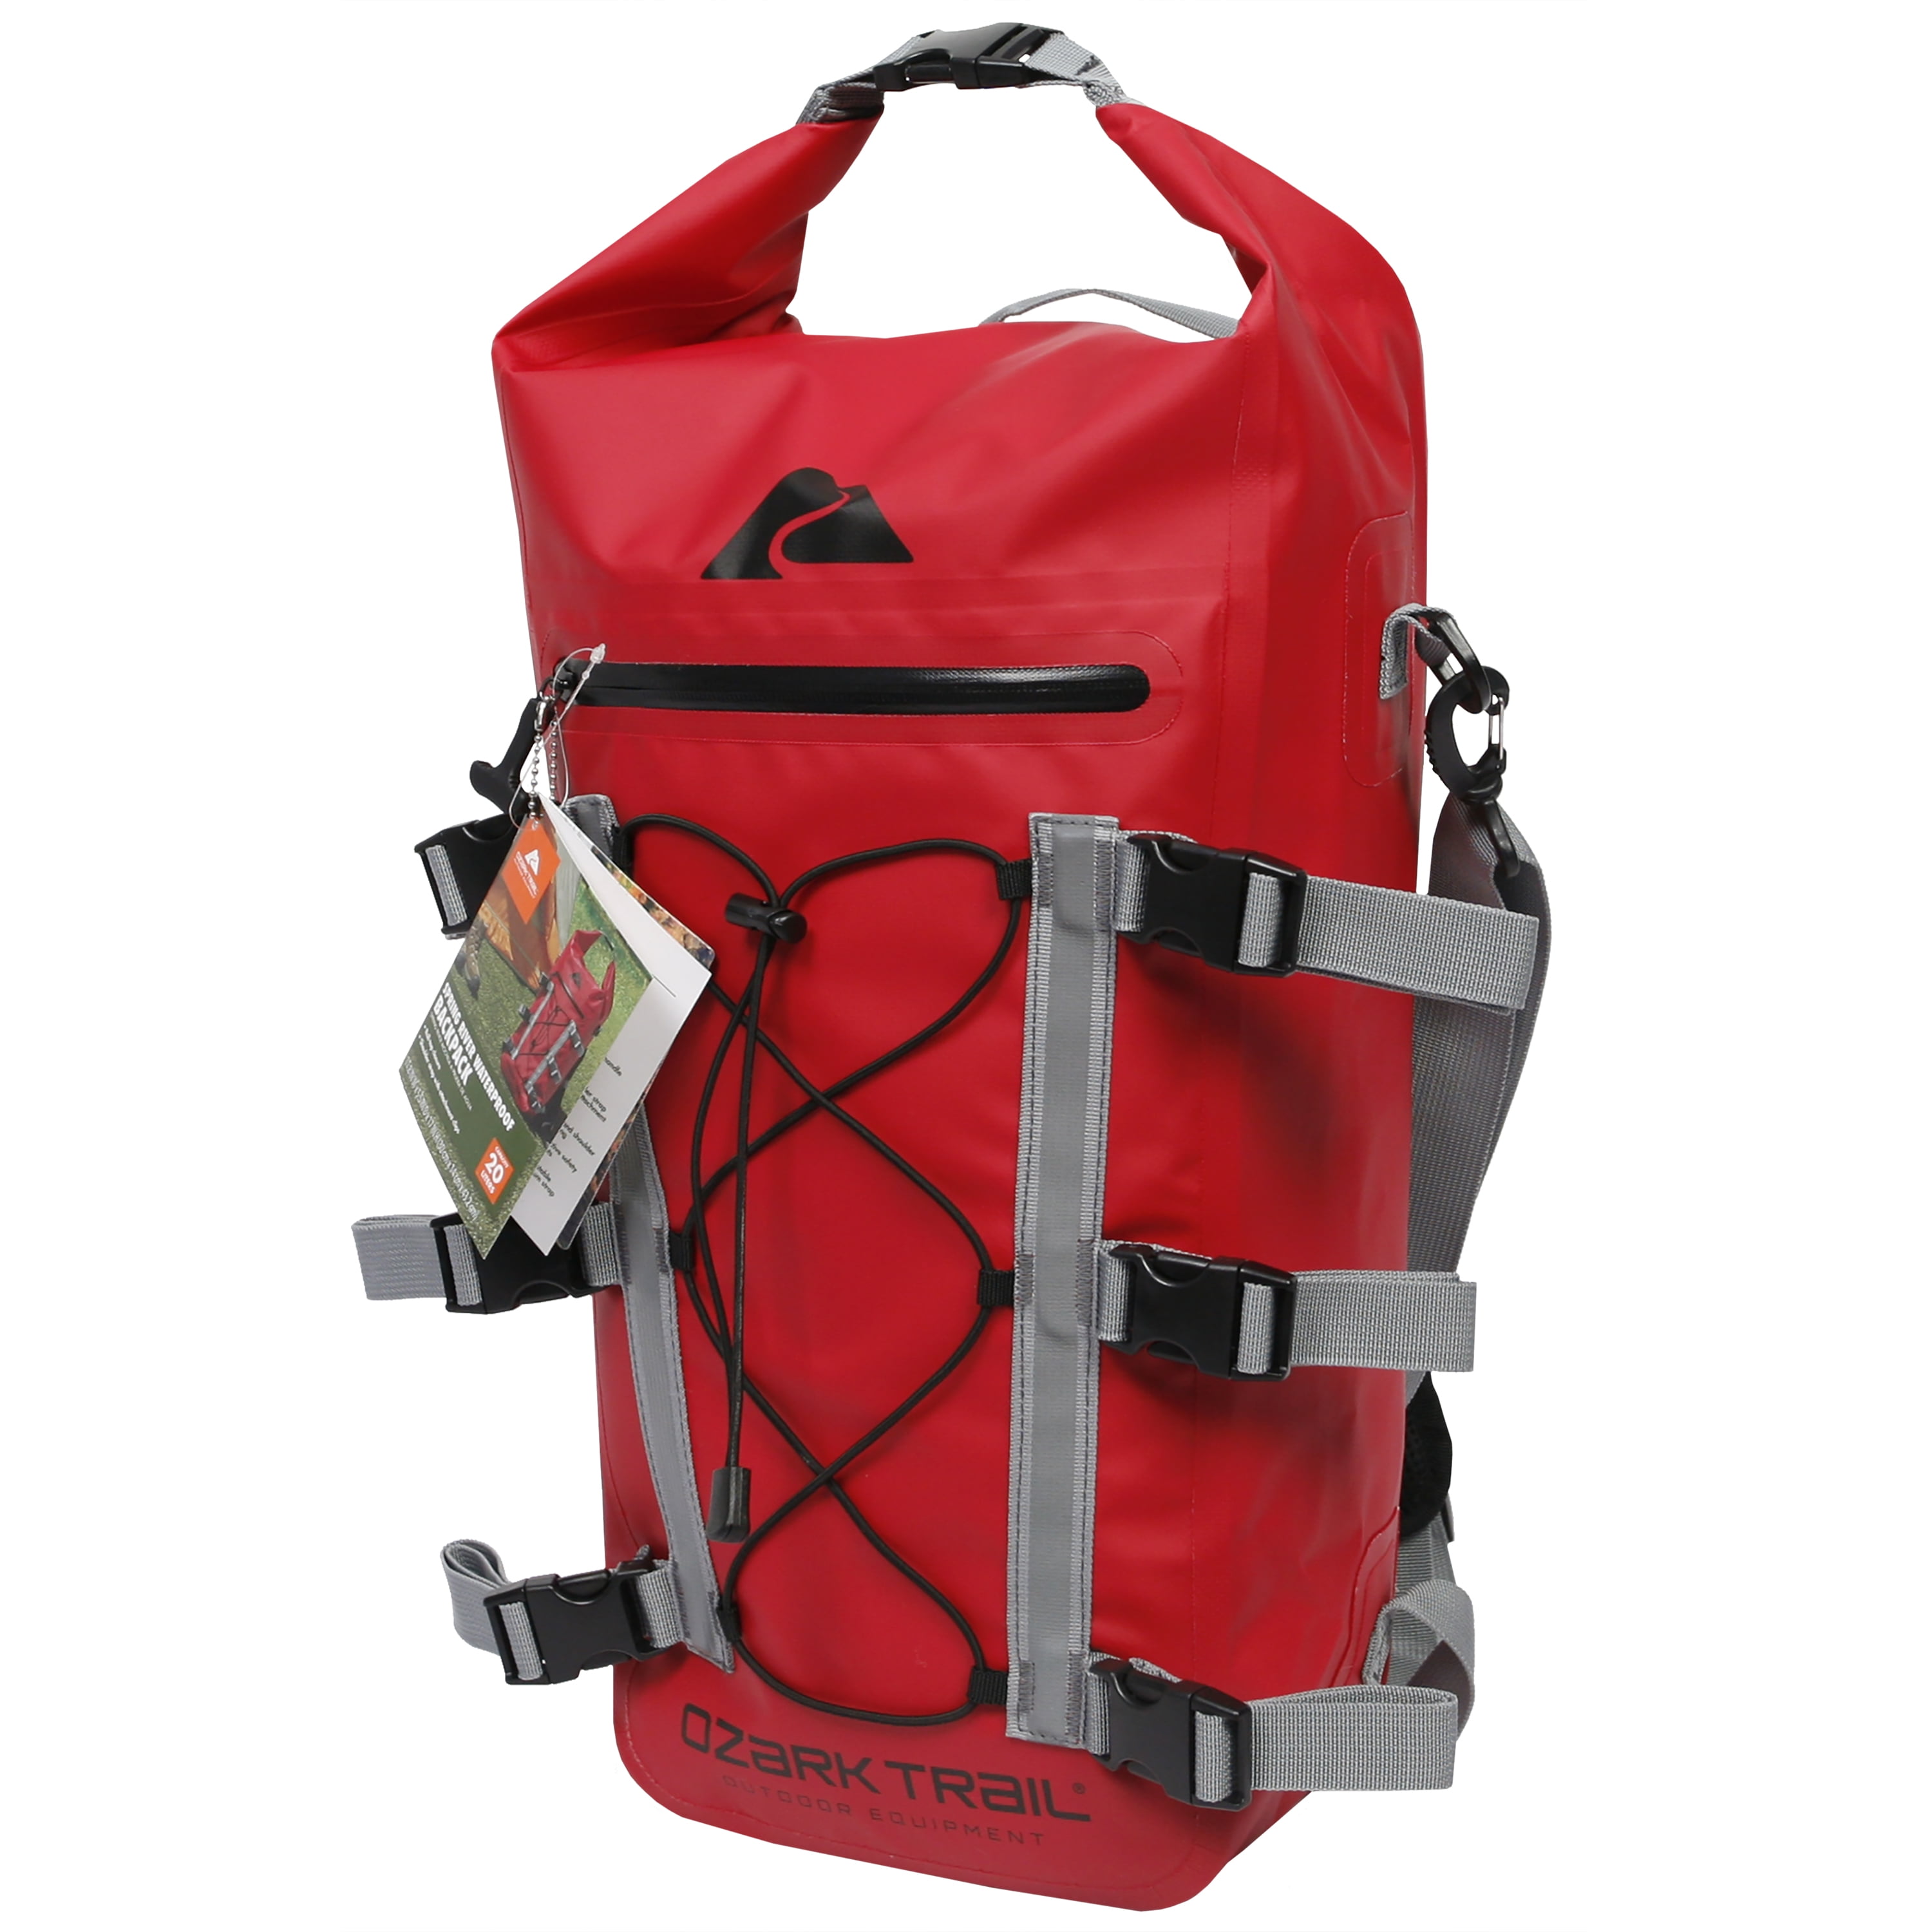 Kayak Camping Hiking Fishing Pouch Sack Waterproof Dry Bag Backpack in Red 